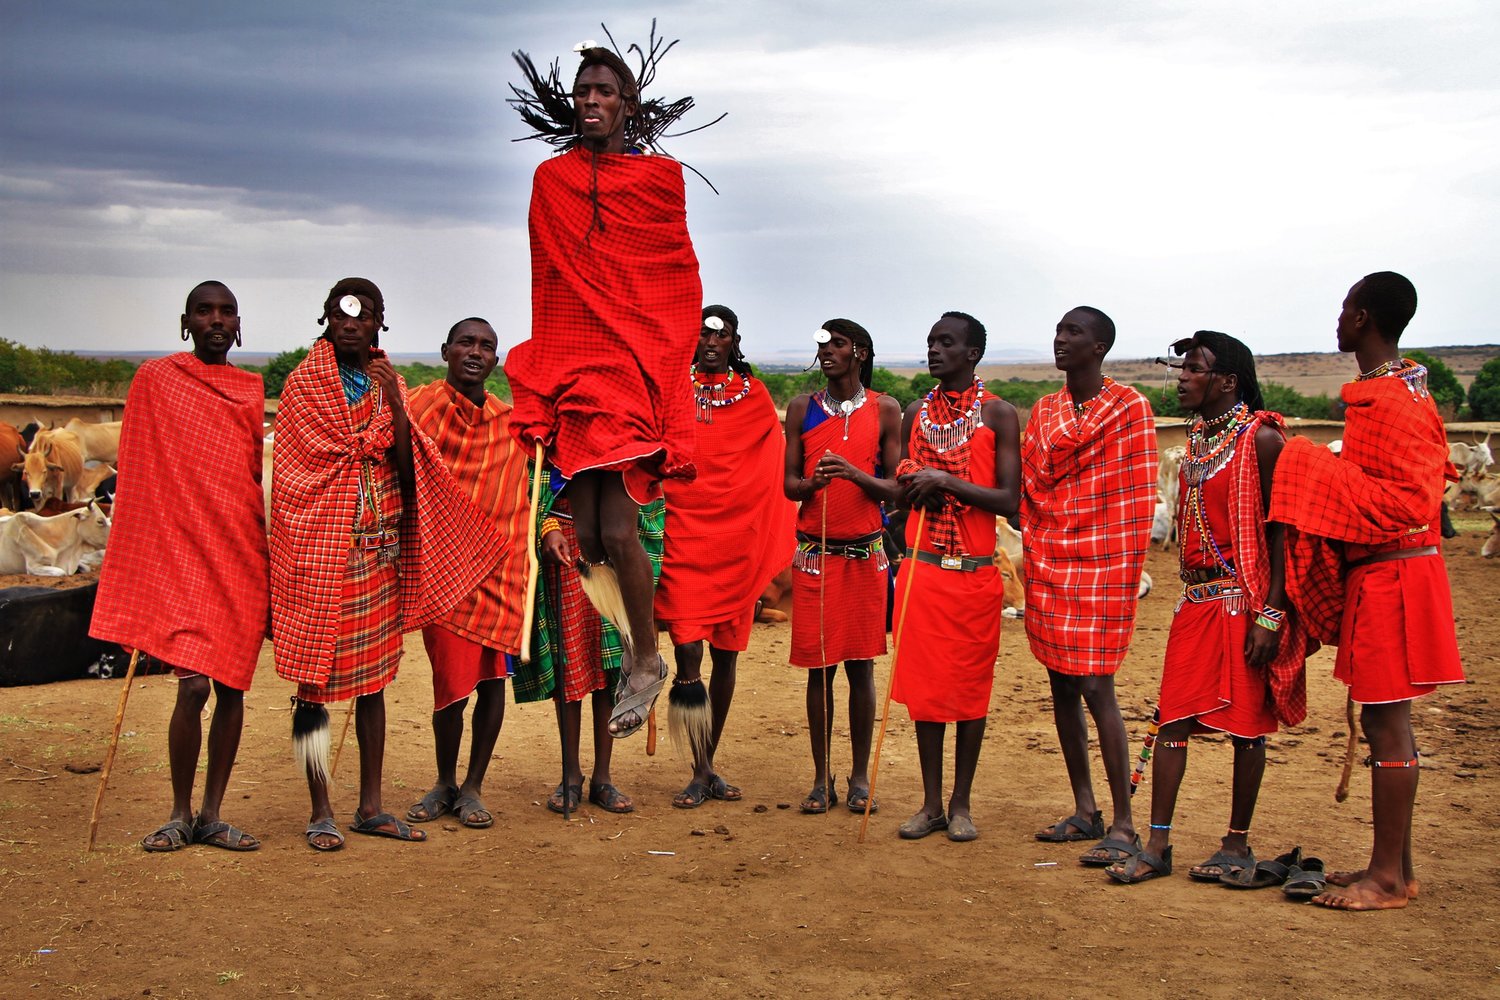 Want to Use the Maasai Name or Print? You Have to Pay for That - The  Fashion Law